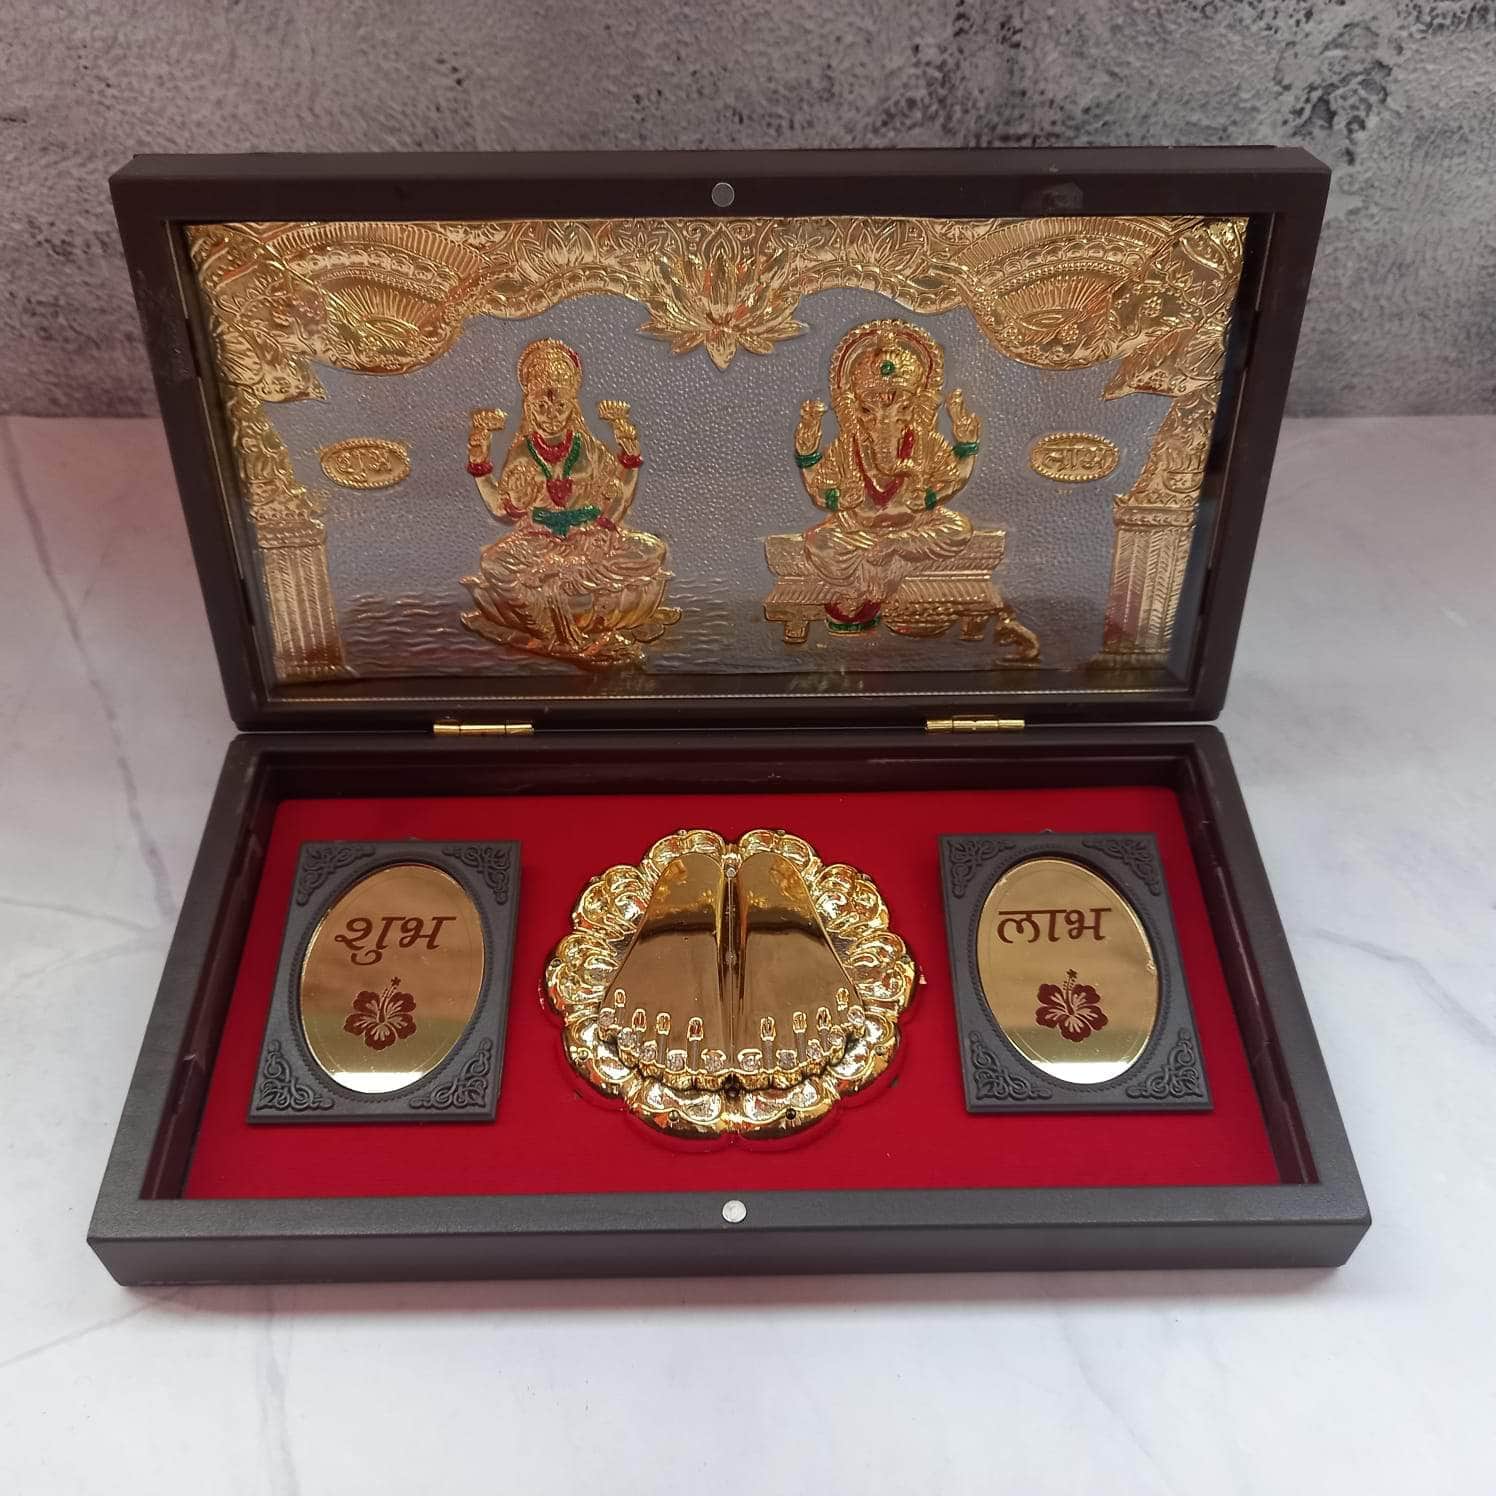 Gift Box Bazaar Decorative Handcrafted Coin Gift Box for Festivals, Parties  and Special Occasions (10 gm Pack of 10, Gold) : Amazon.in: Home & Kitchen